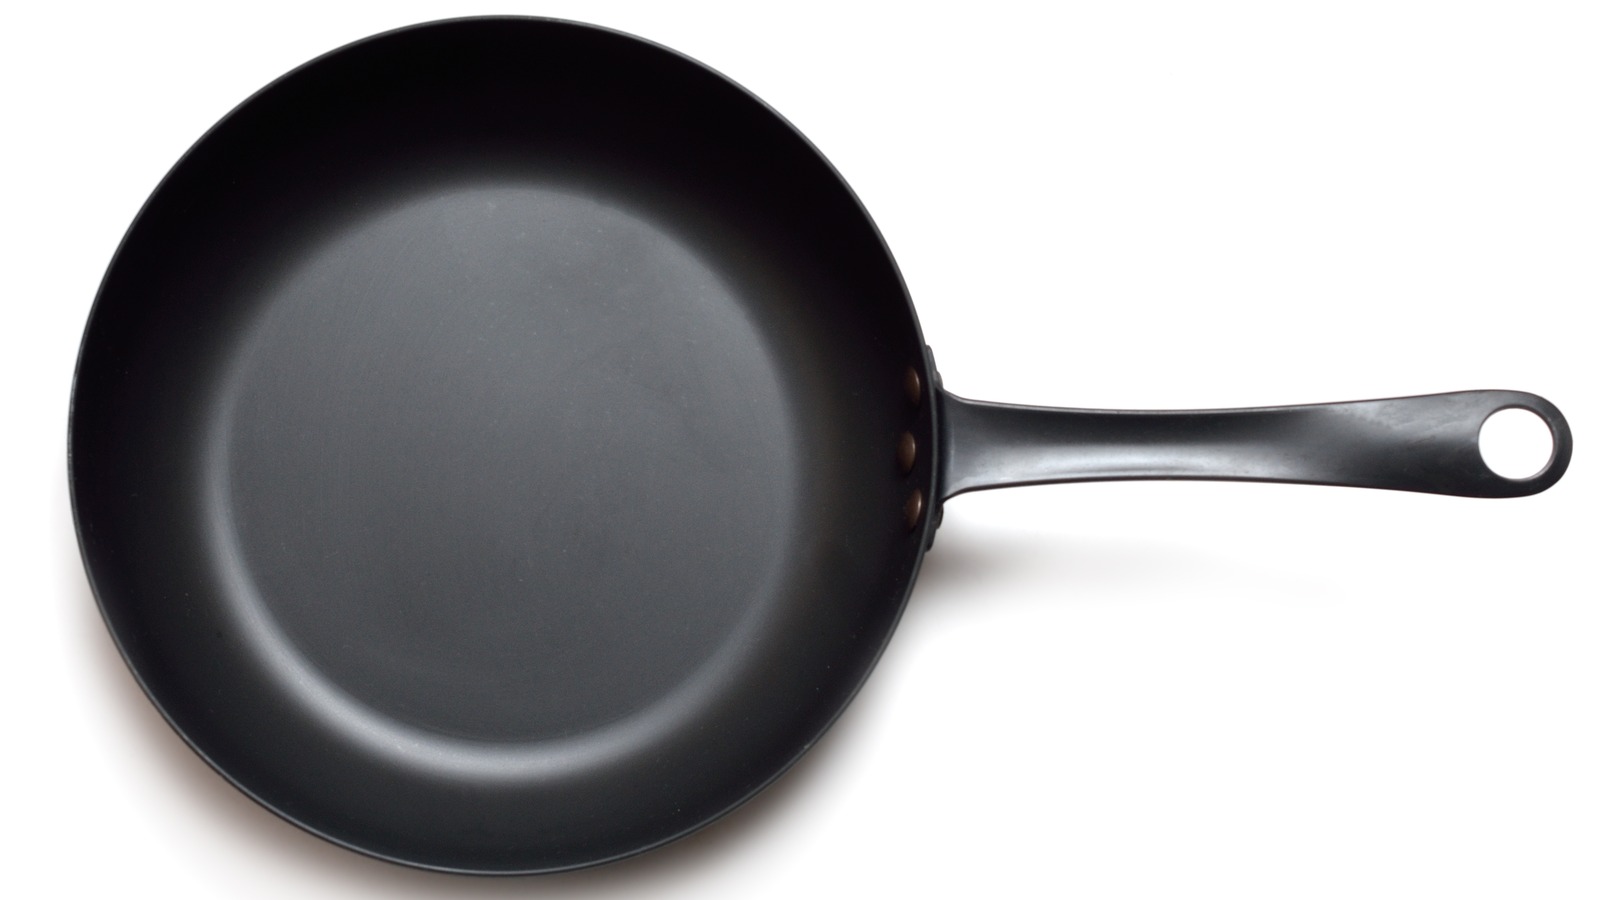 https://www.tastingtable.com/img/gallery/do-you-need-to-season-a-carbon-steel-pan/l-intro-1677079414.jpg